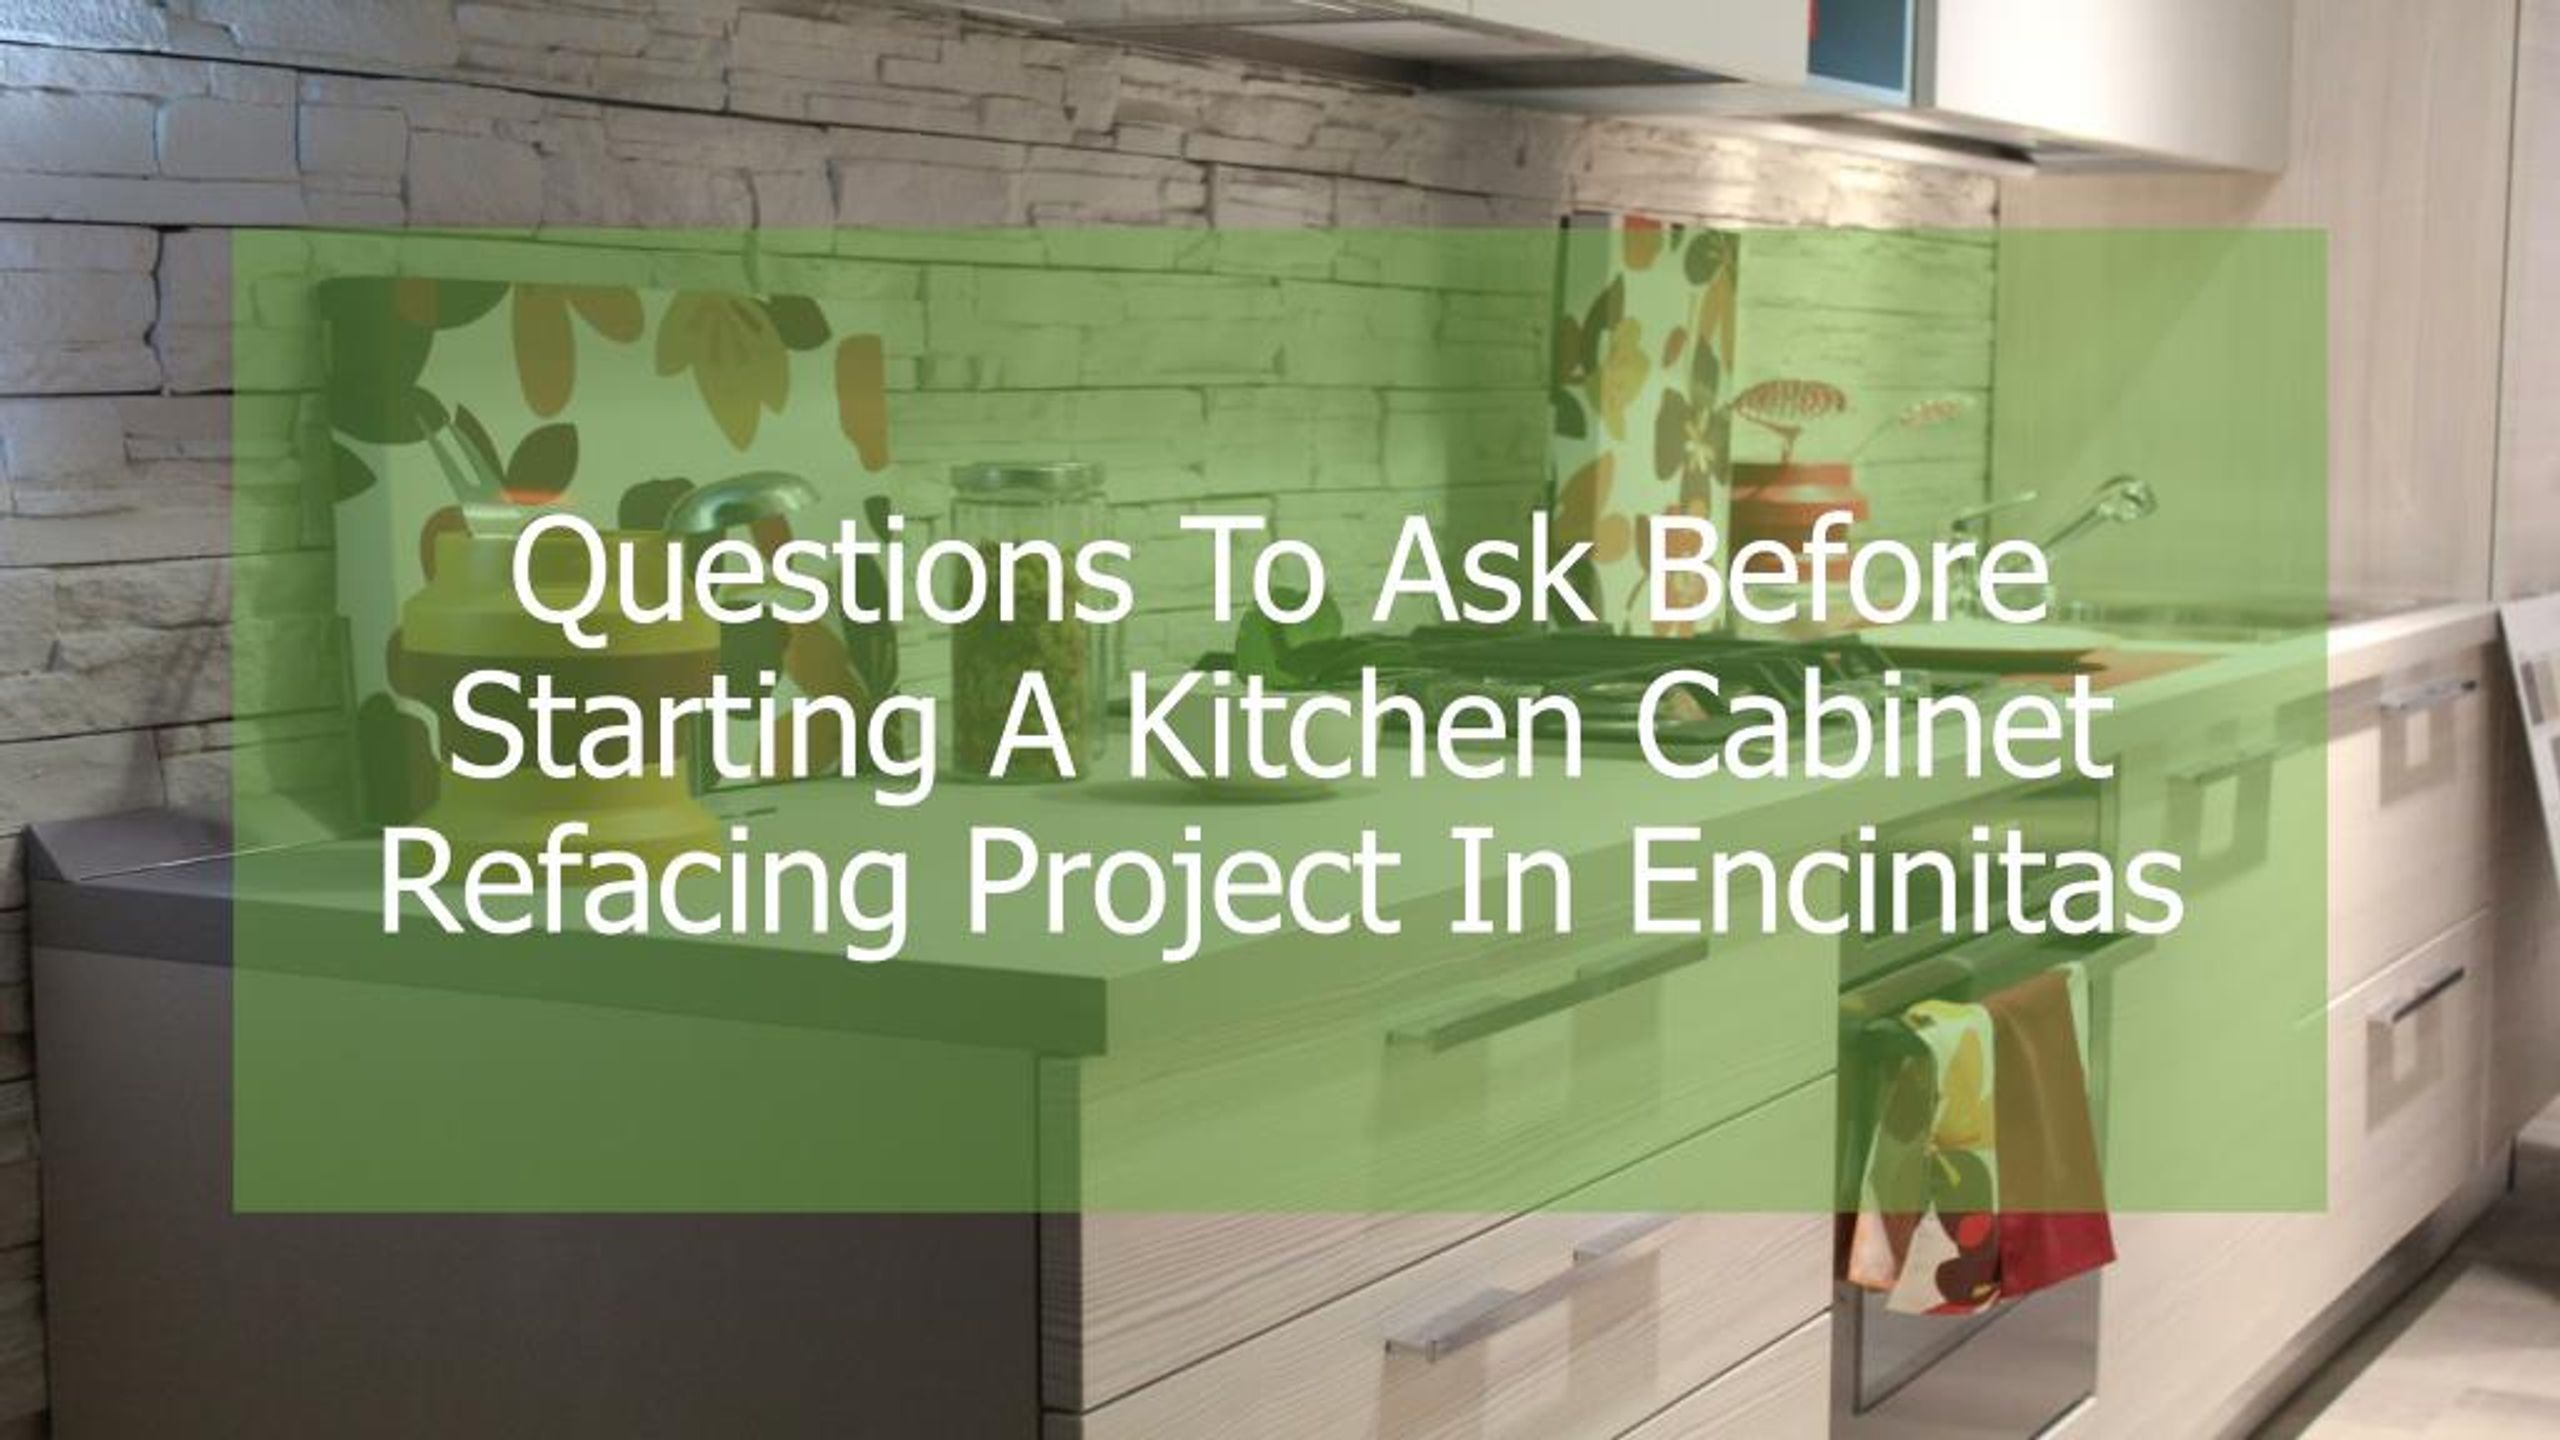 Ppt Questions To Ask Before Starting A Kitchen Cabinet Refacing